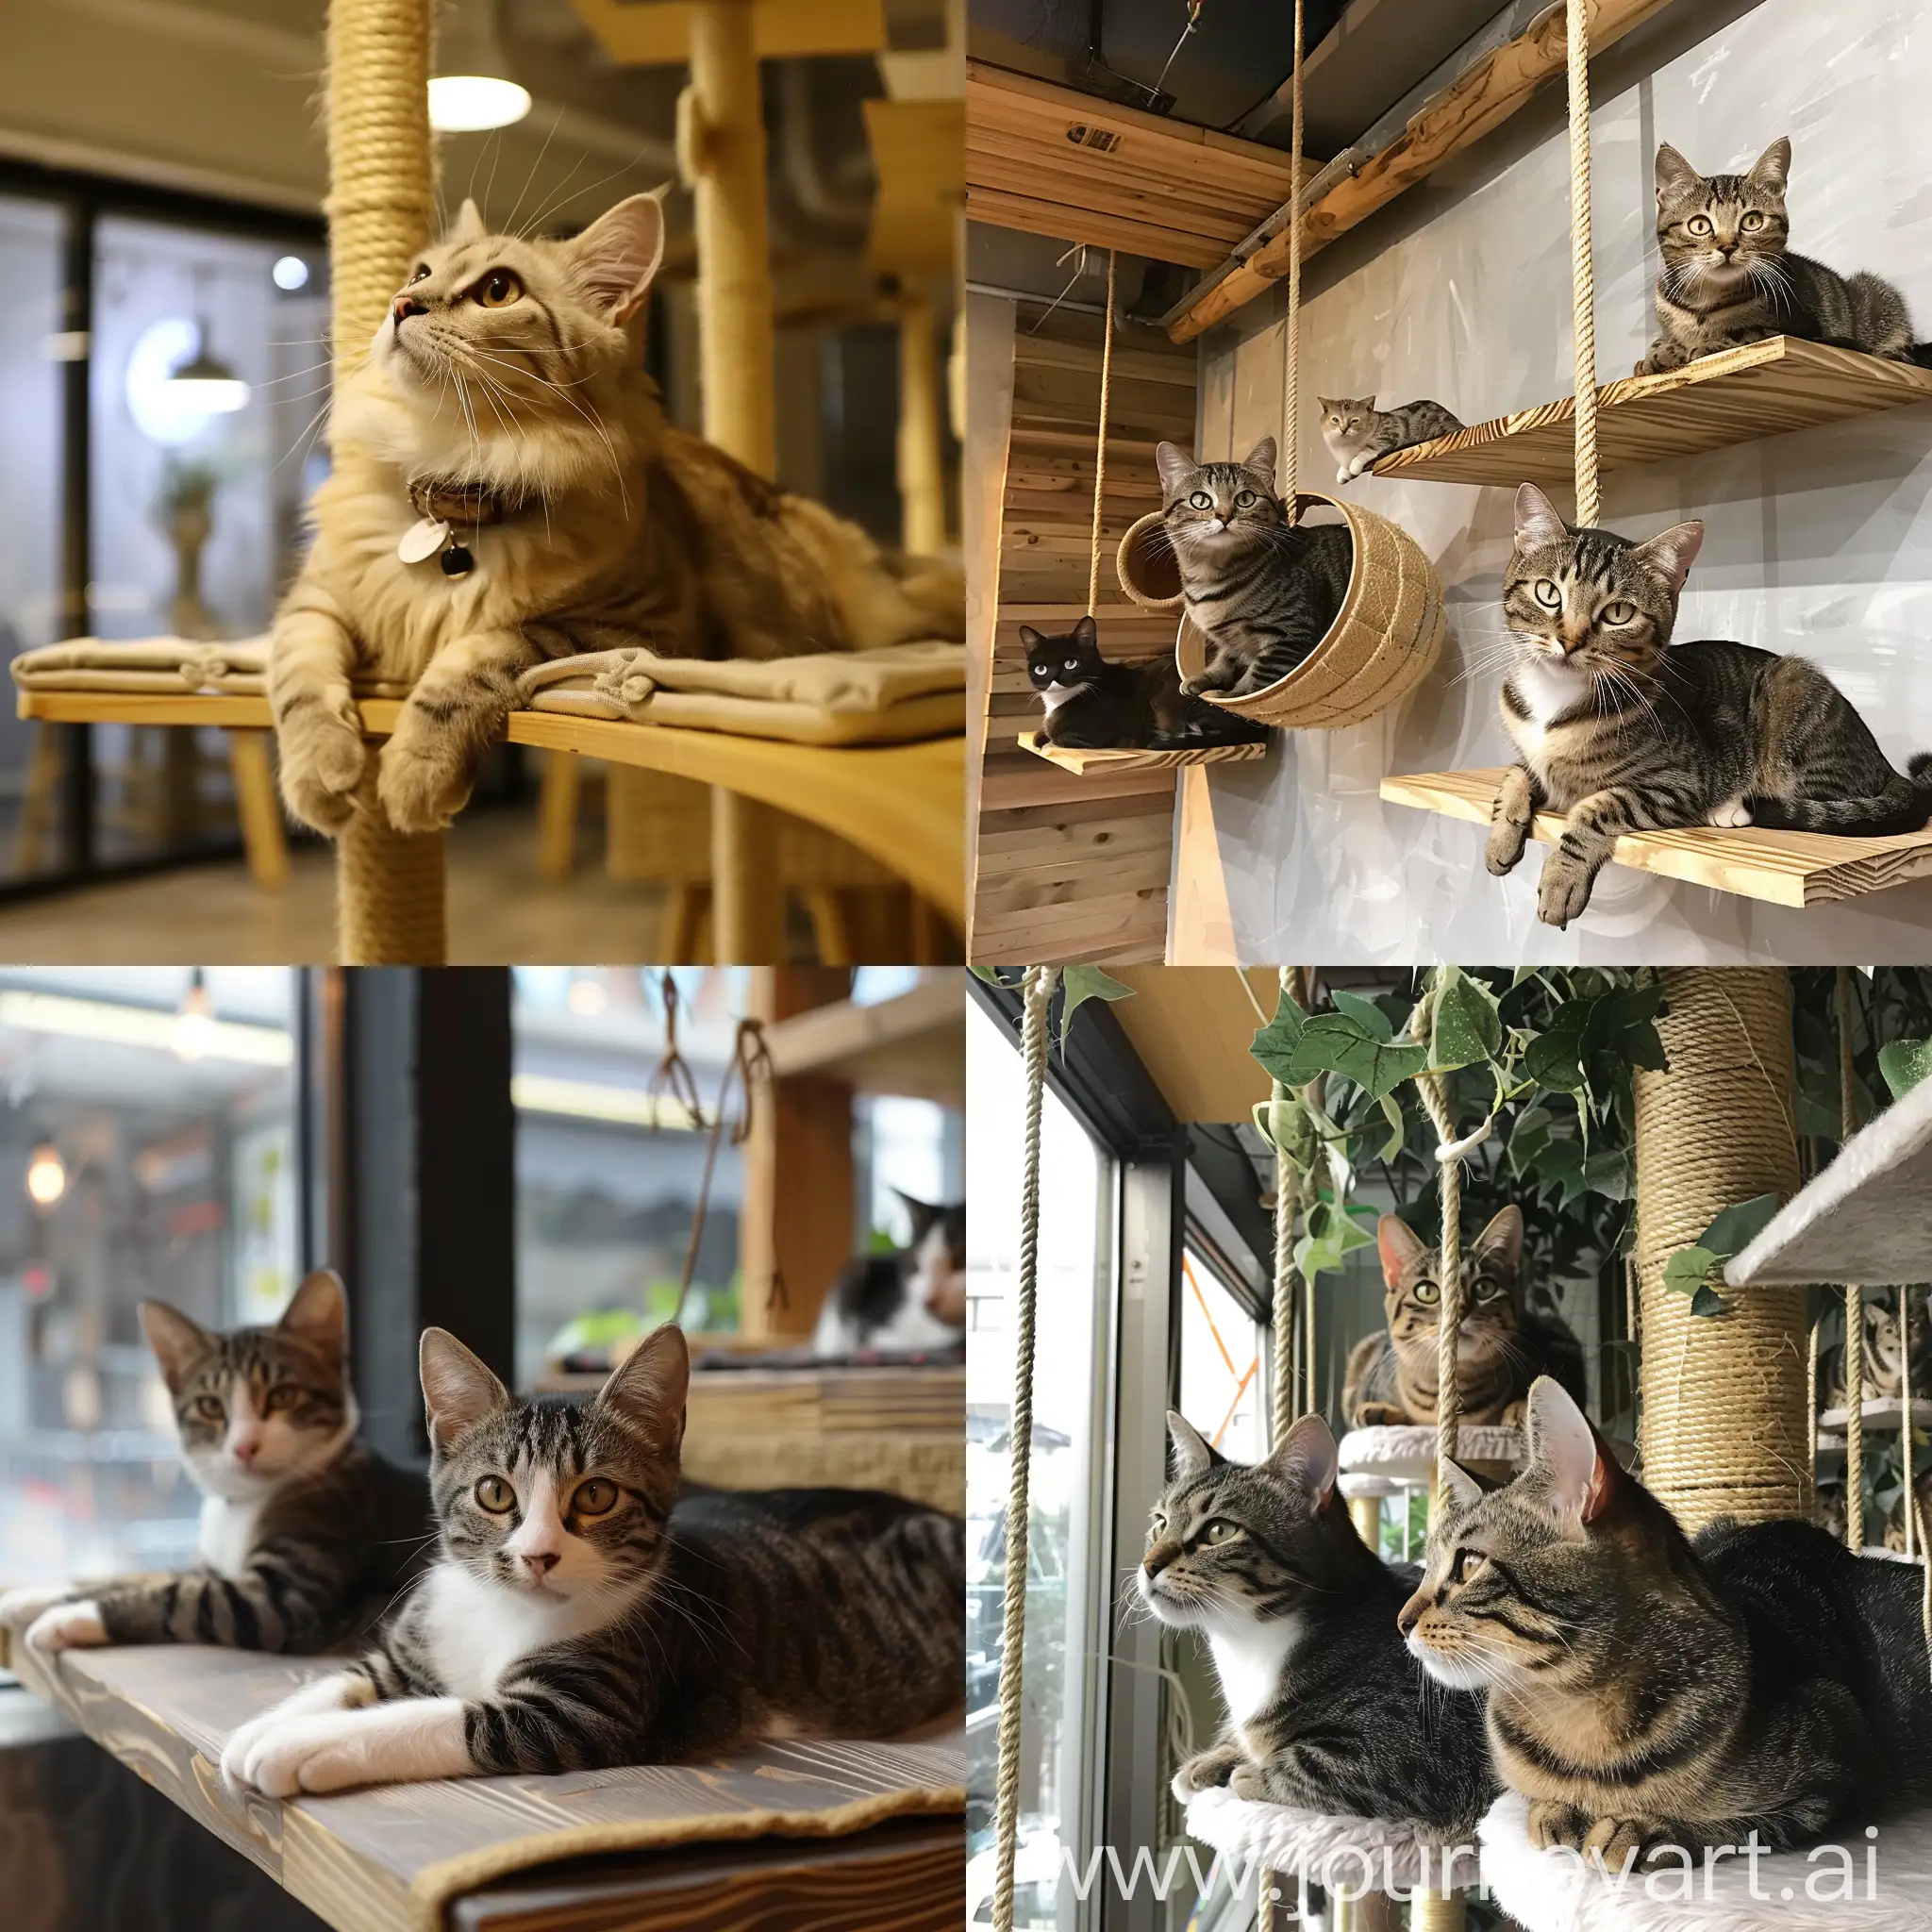 cat cafe with possibility to adopt a pet